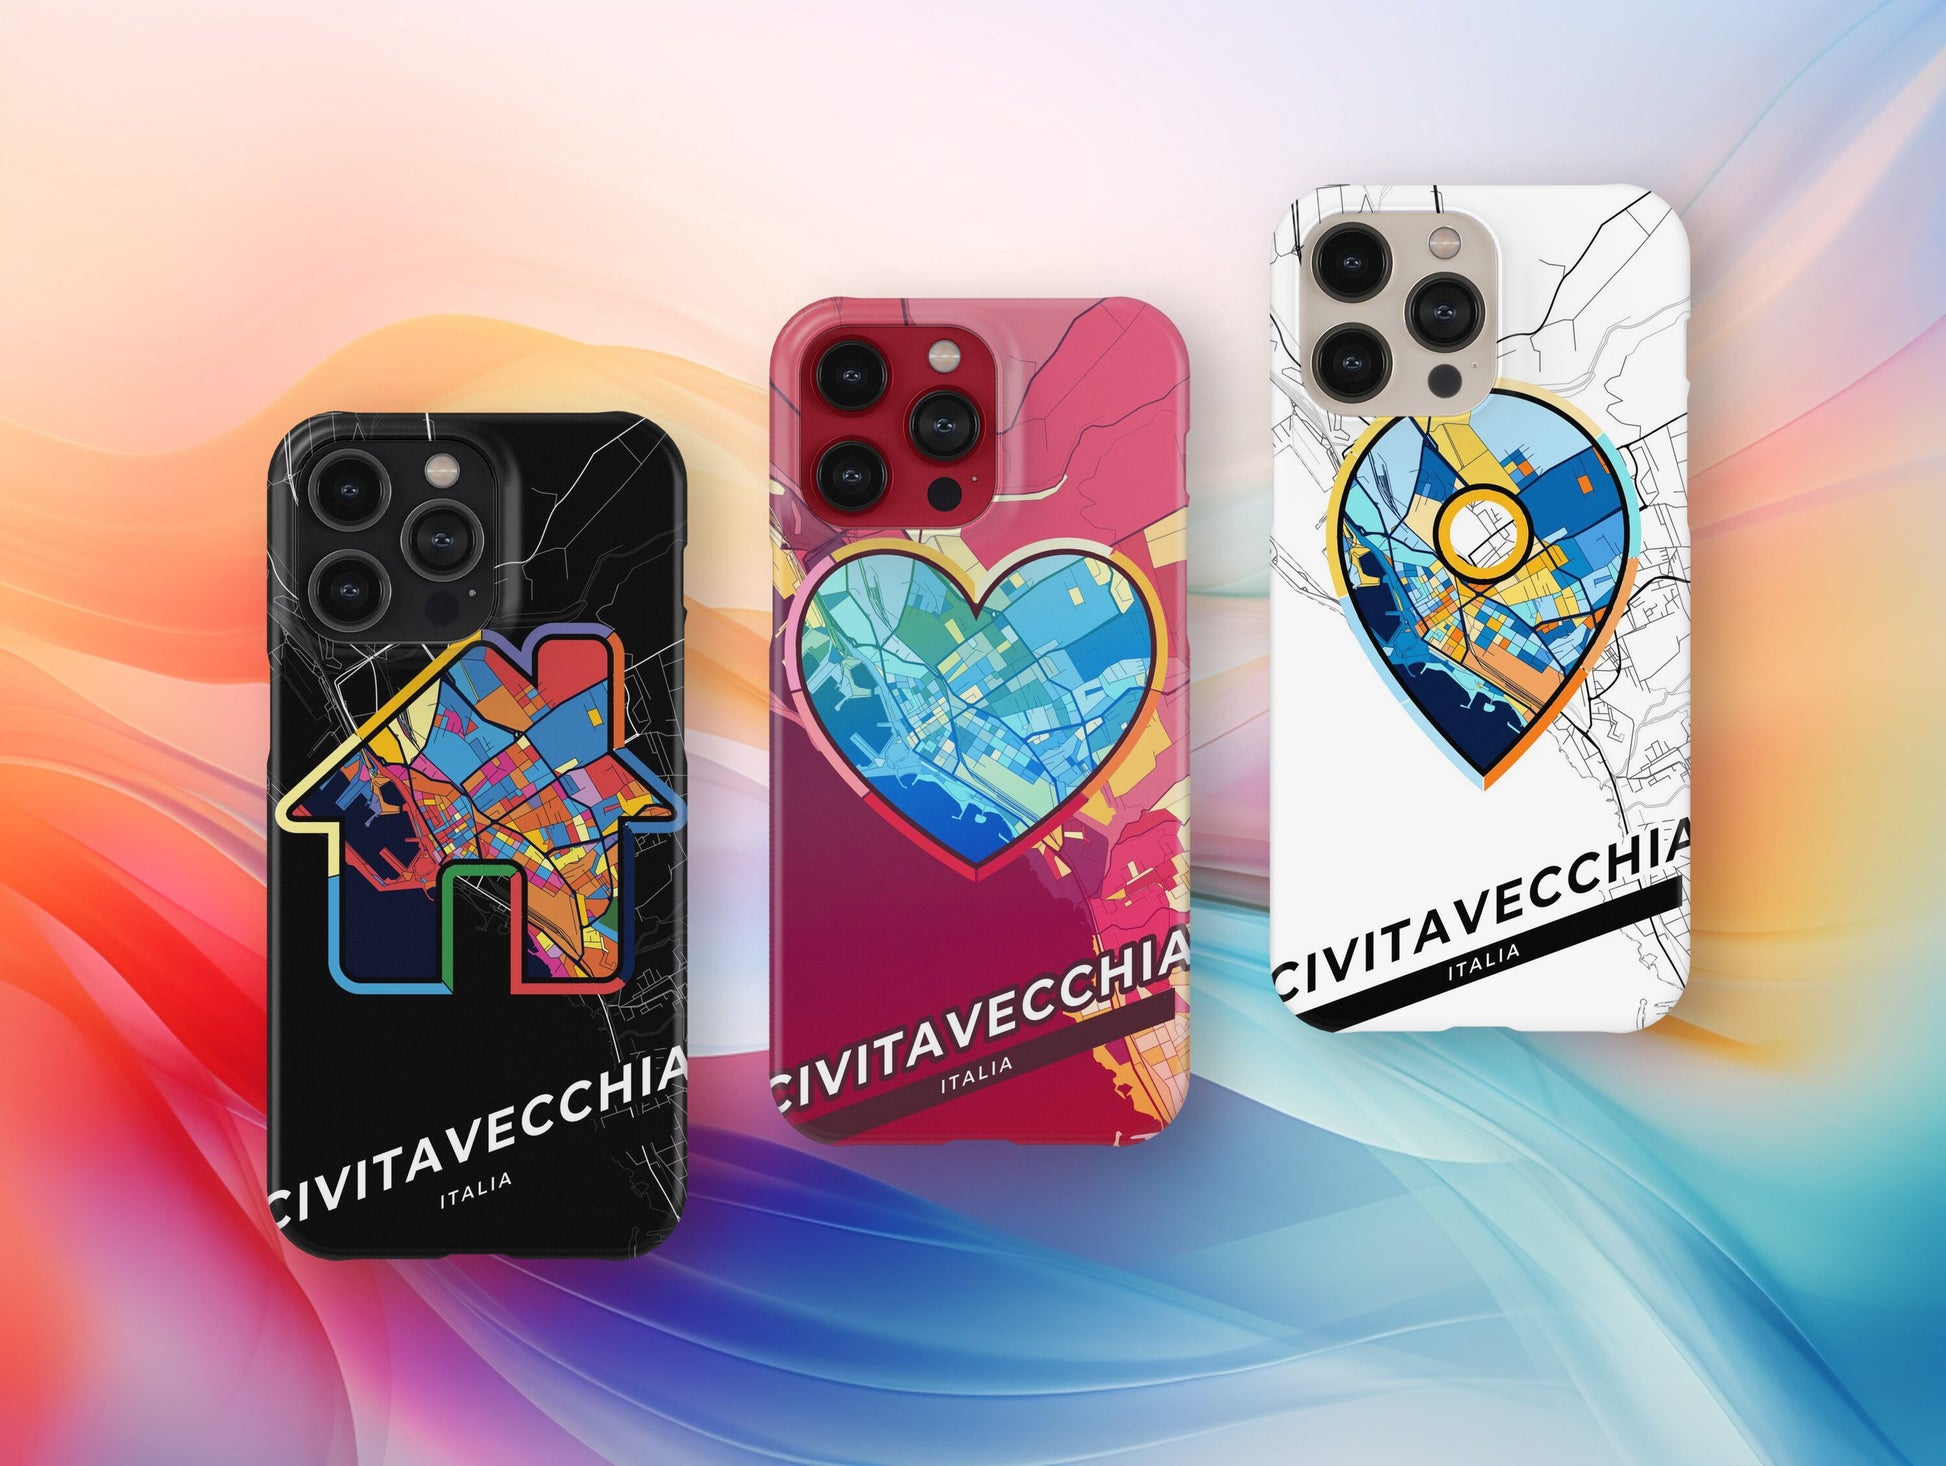 Civitavecchia Italy slim phone case with colorful icon. Birthday, wedding or housewarming gift. Couple match cases.